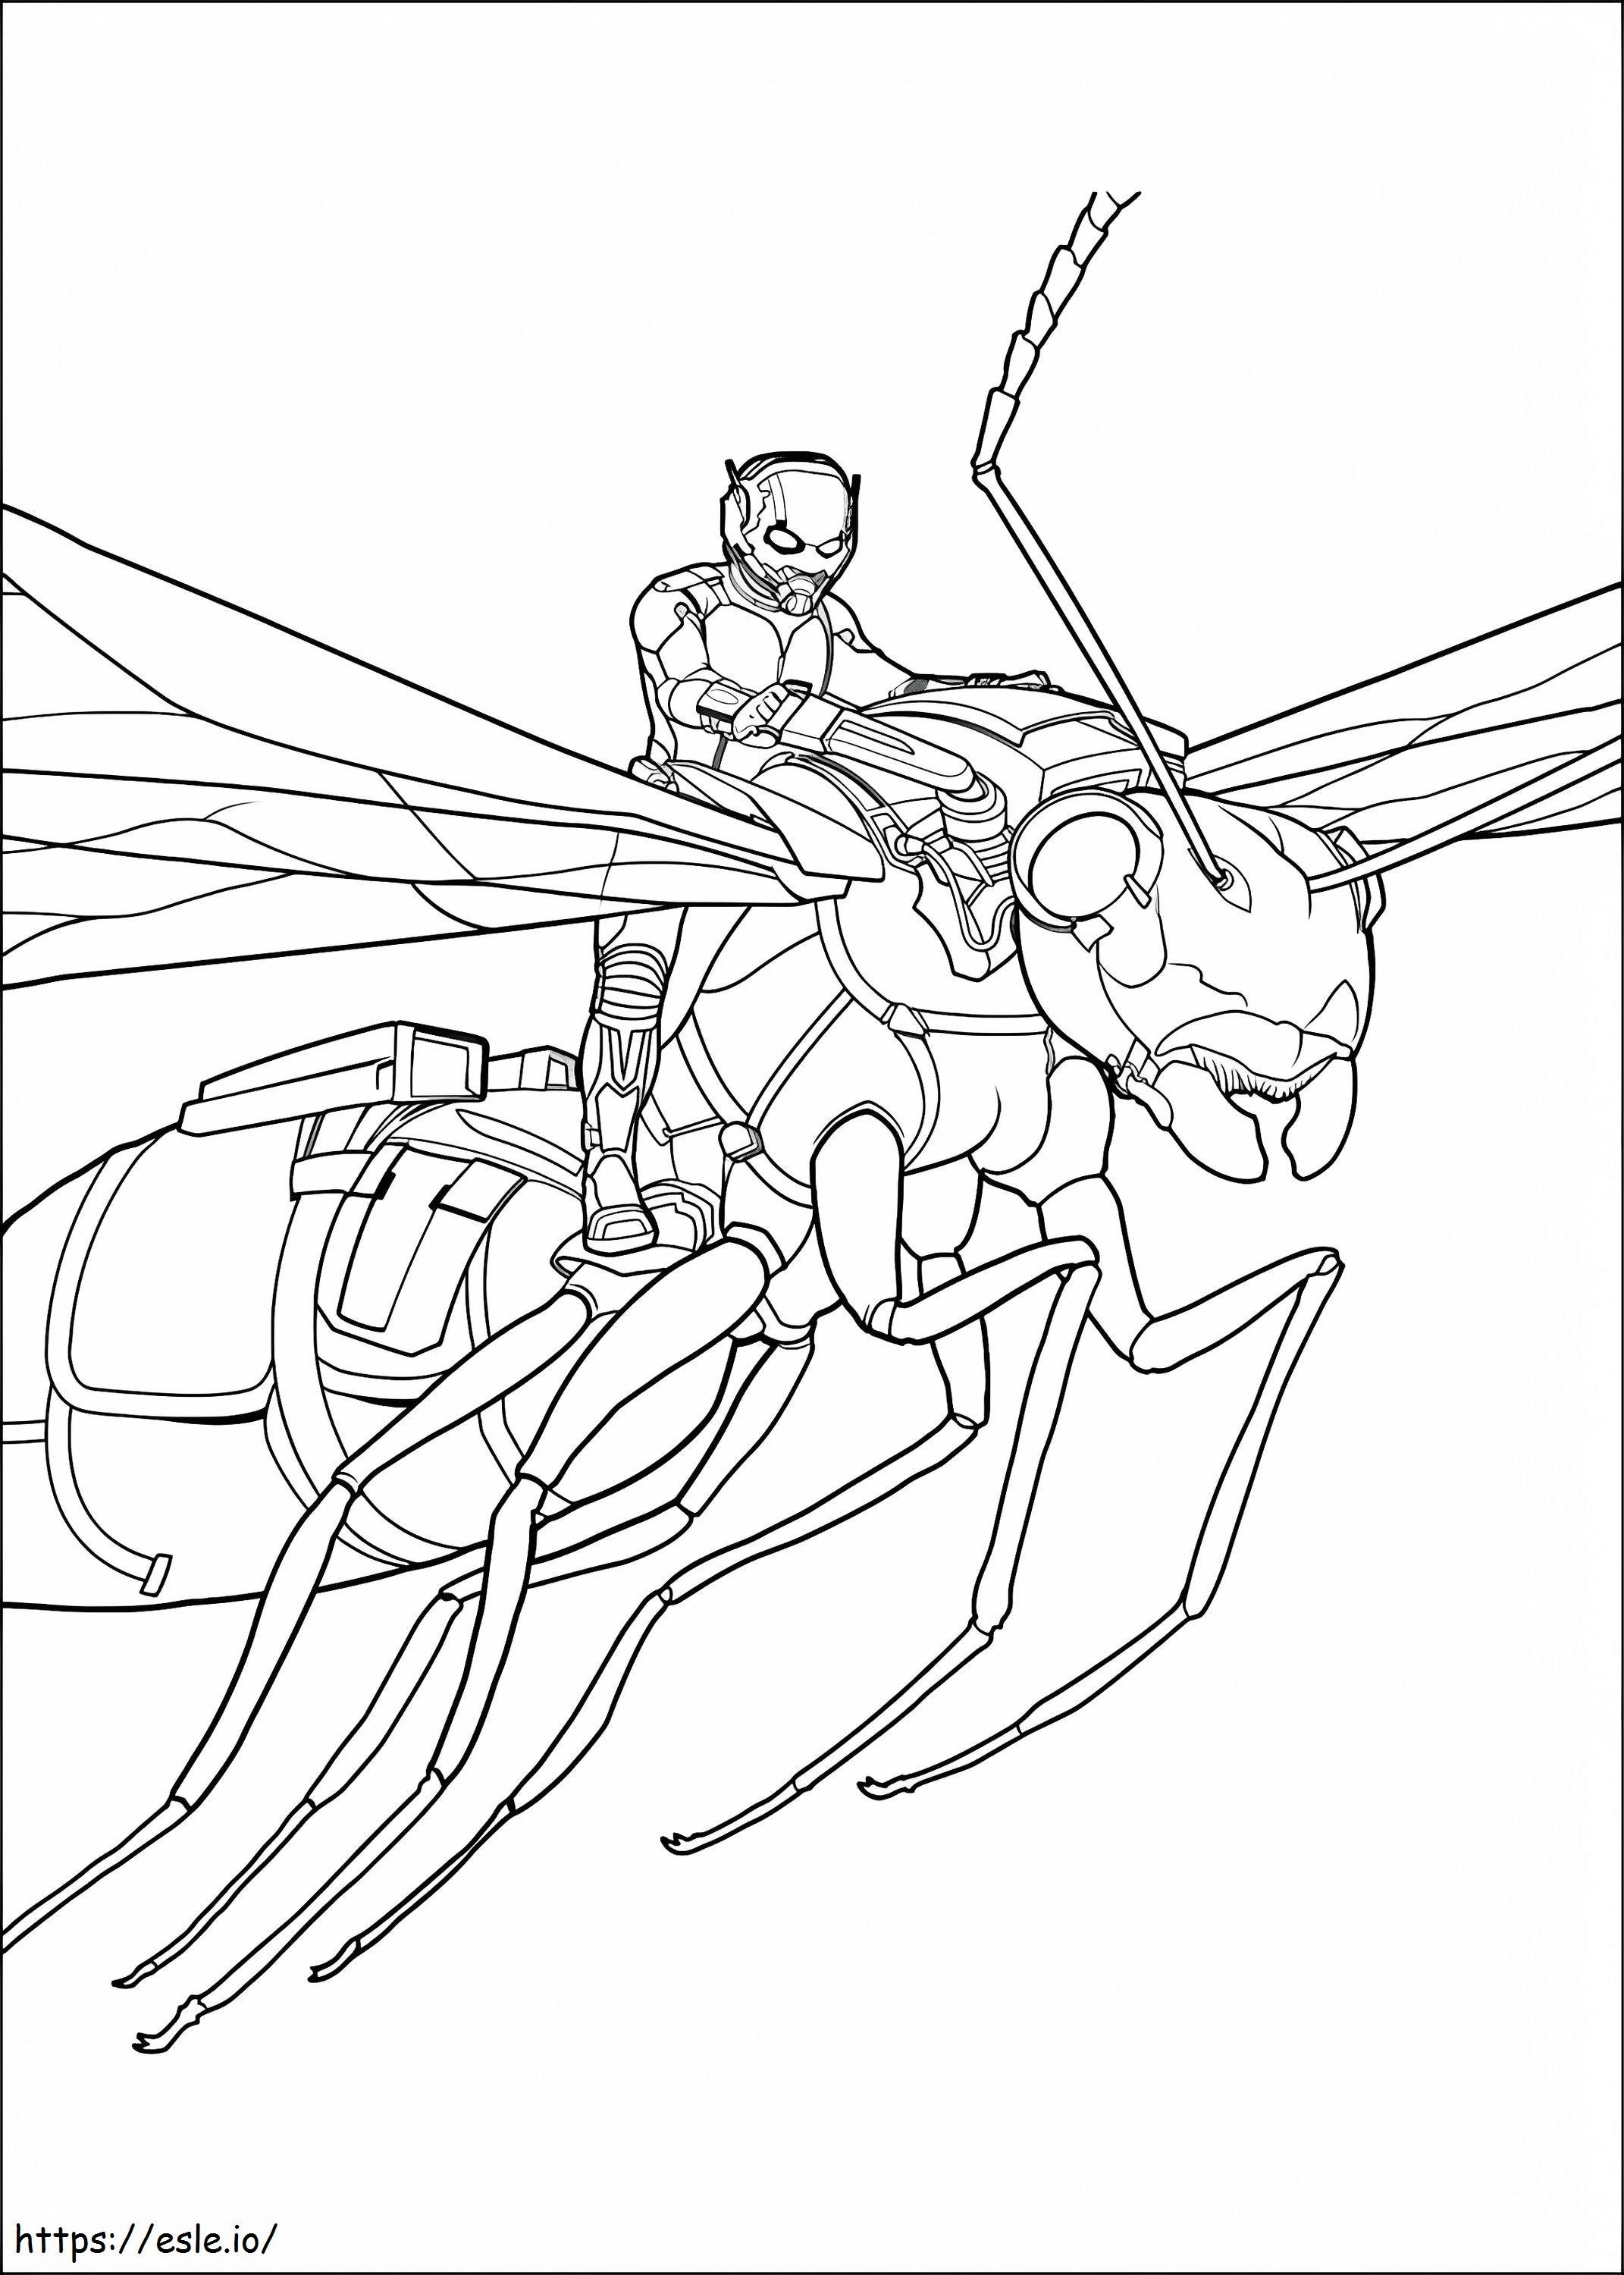 Ant Man On Flying Ant A4 coloring page